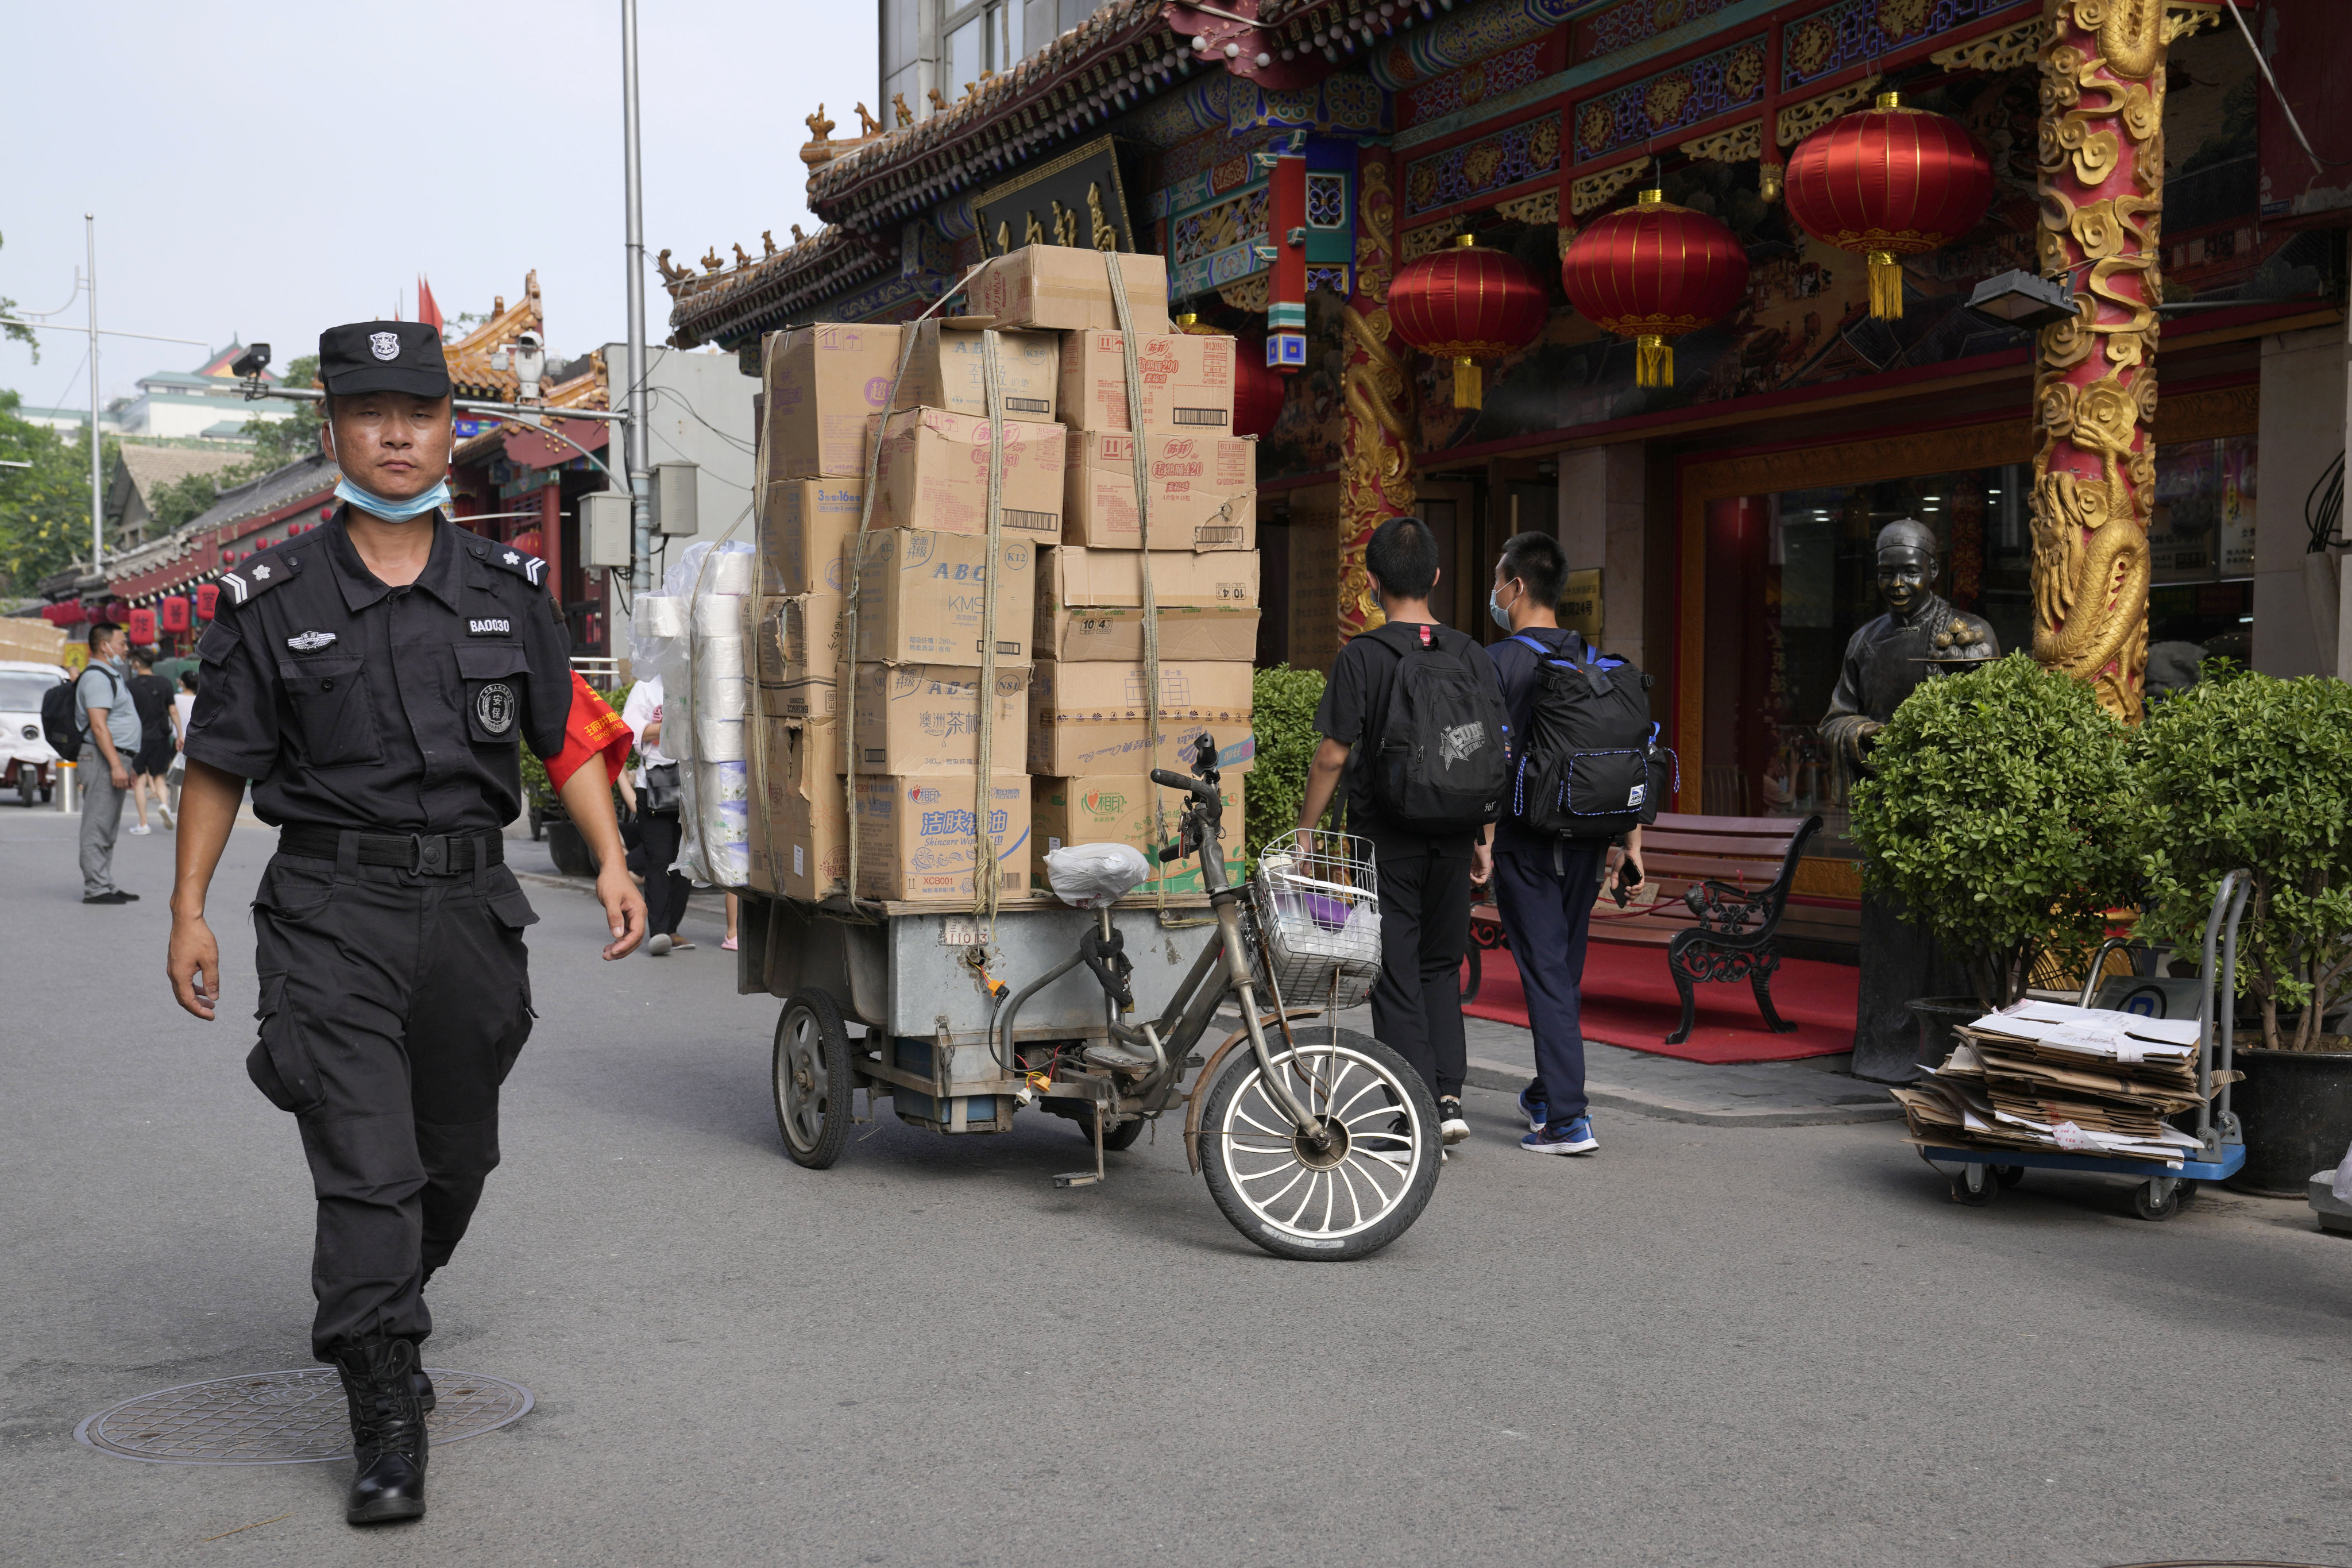 A security guard walks past deliveries on the Wangfujing retail street in Beijing on July 14. China’s economic data for July illustrates a broad-based slowing in economic activity. Photo: AP  